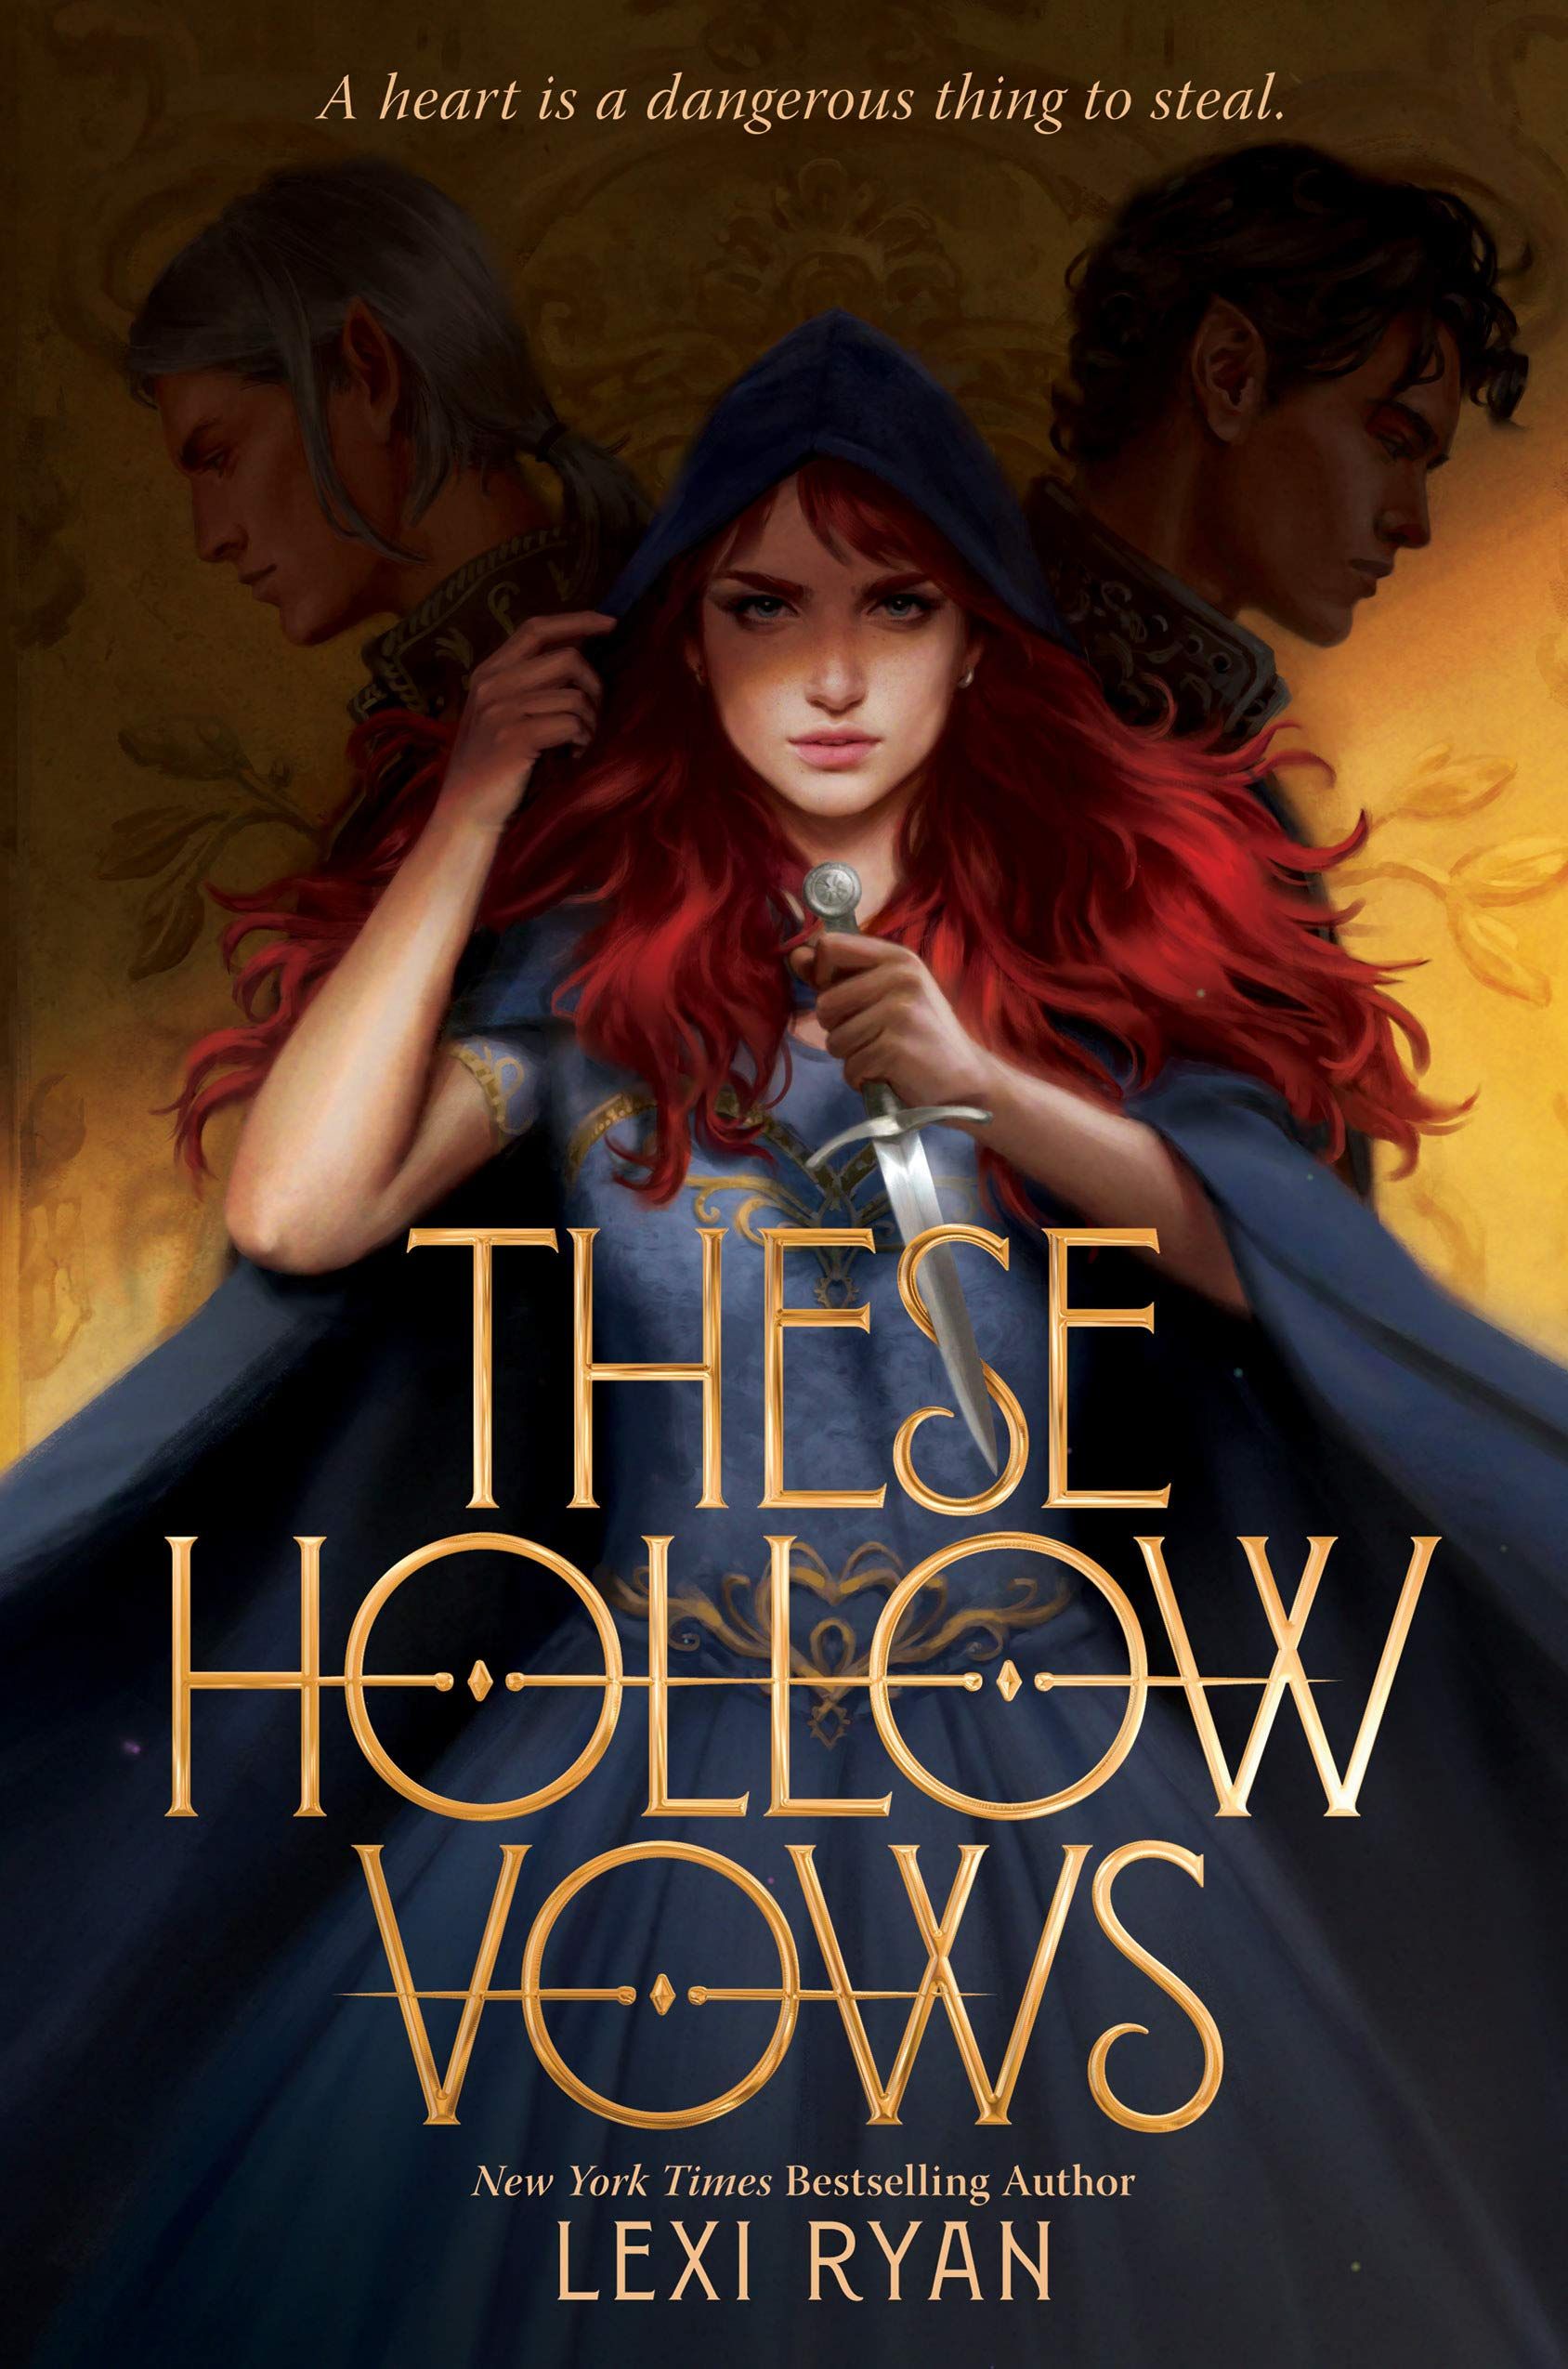 These Hollow Vows book cover: red haired girl with cloak, next to two boys